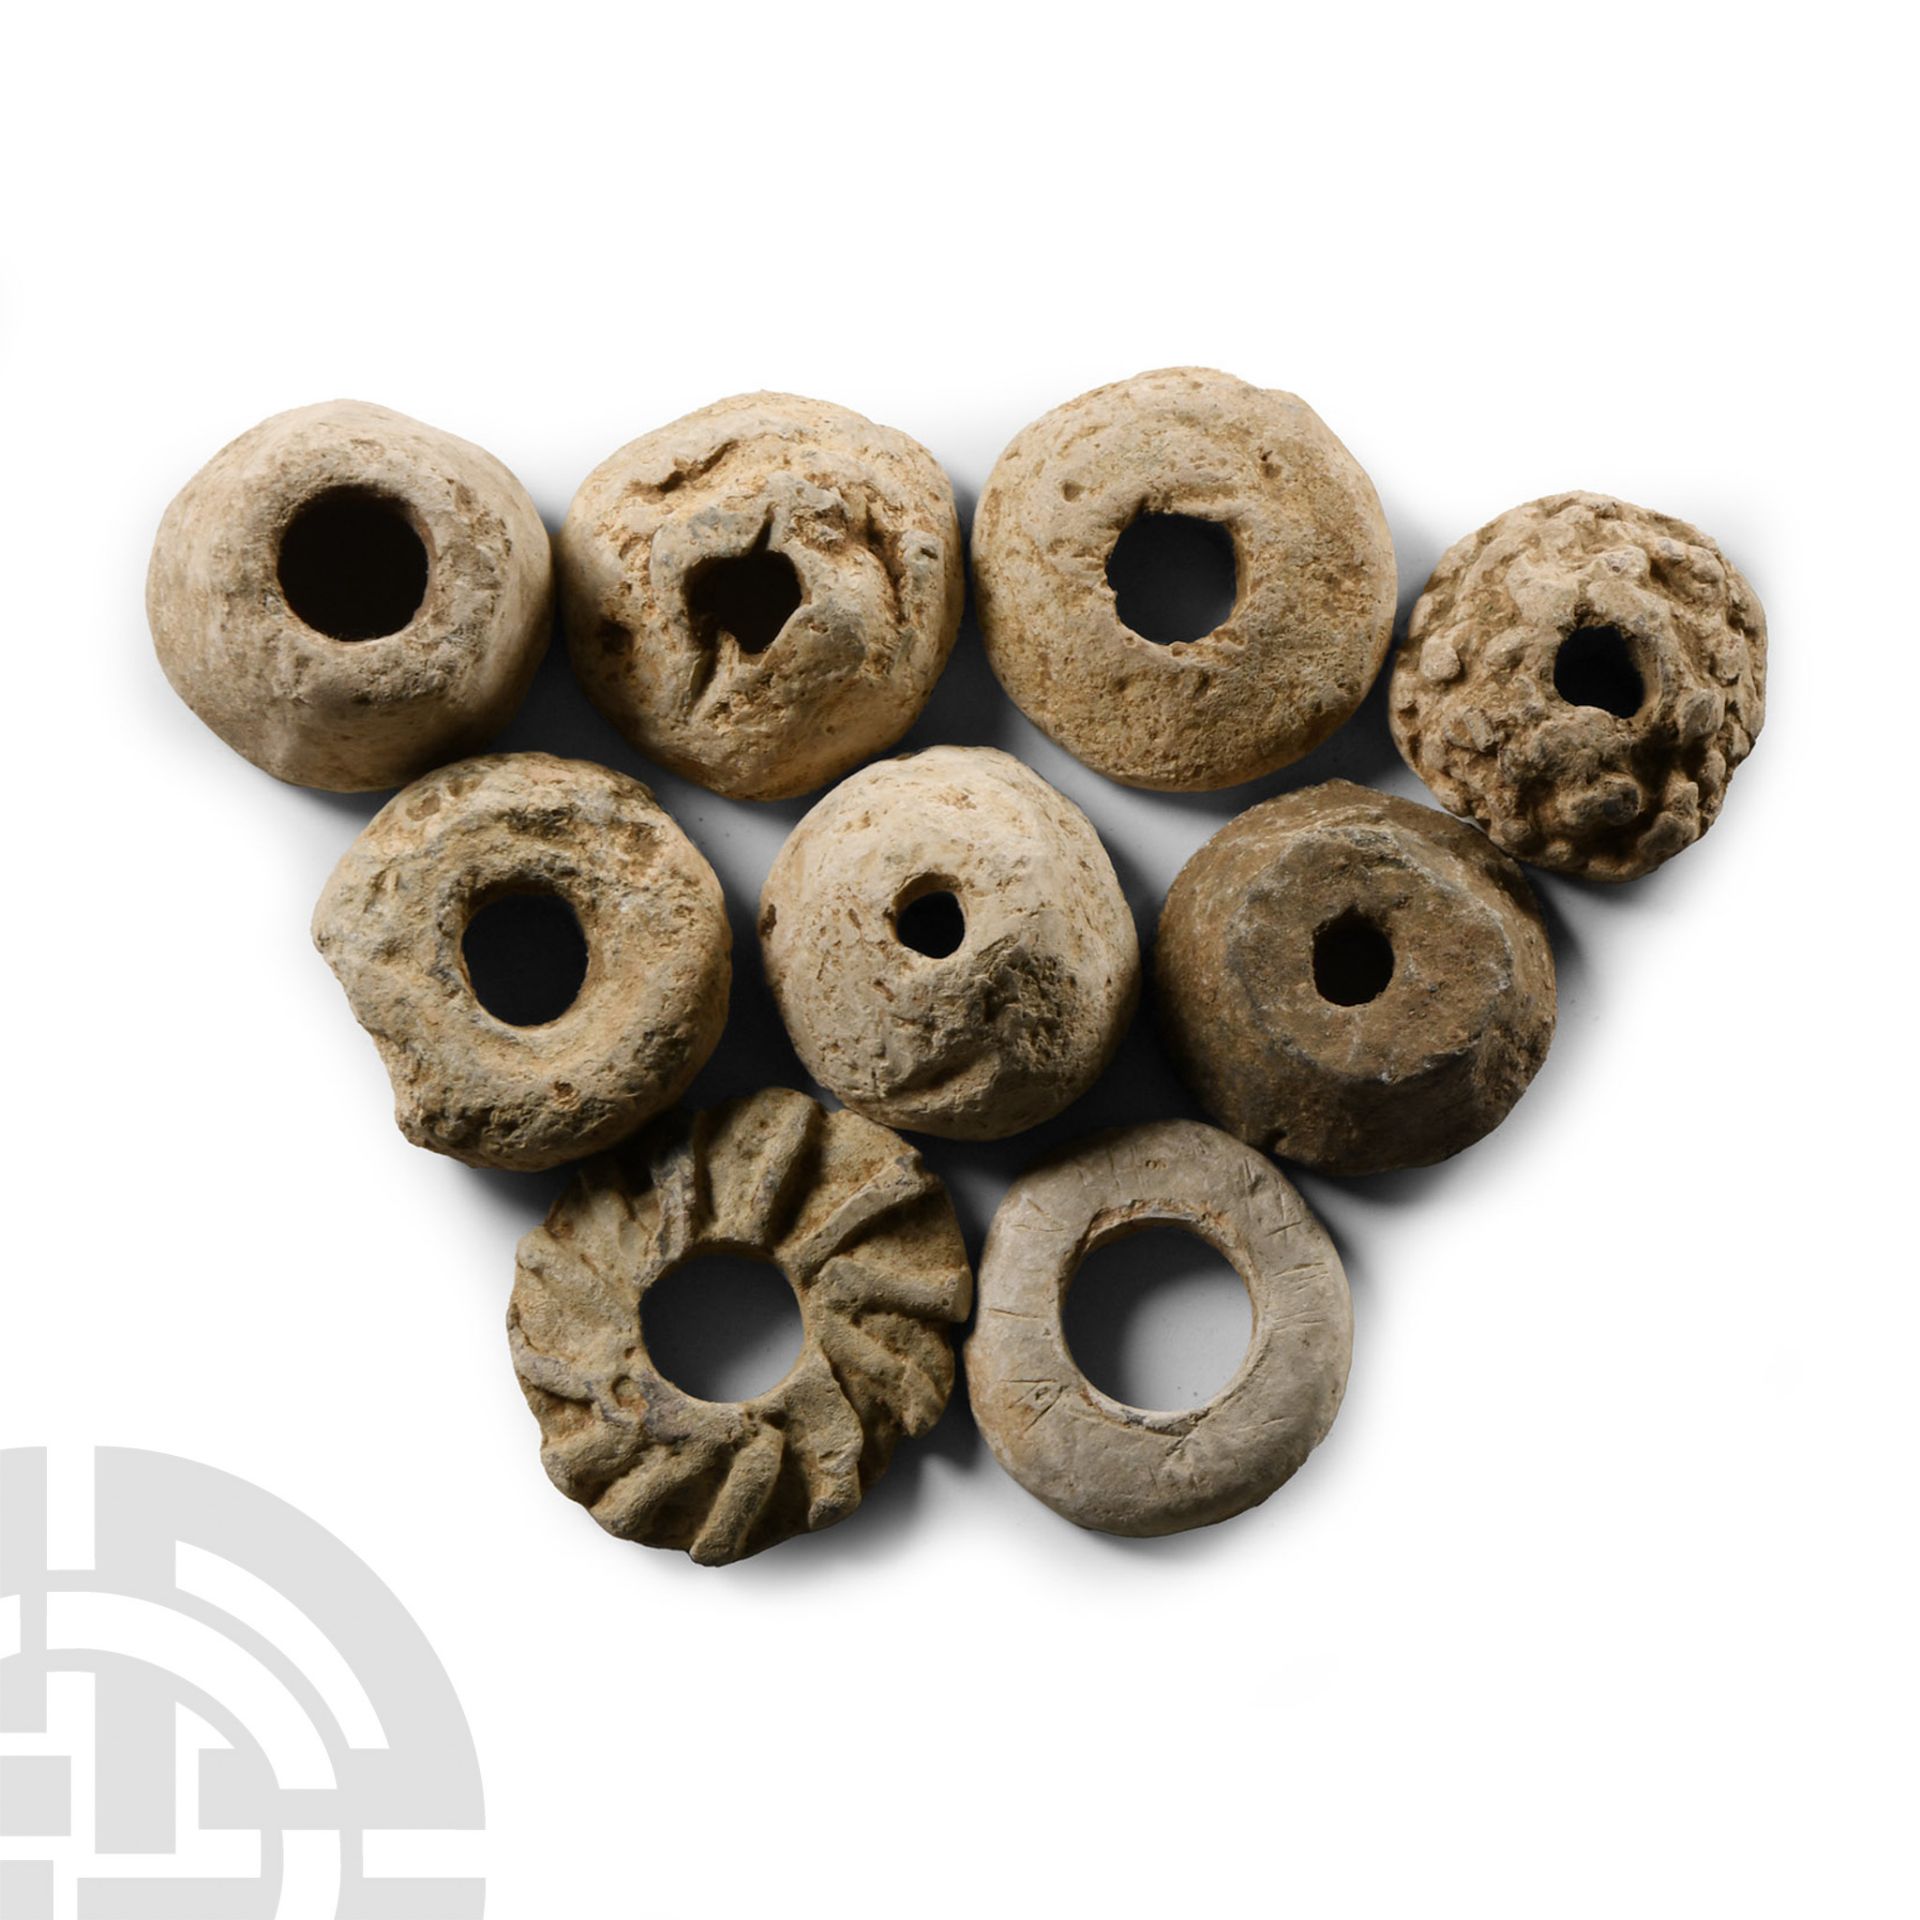 Medieval 'Essex' Lead Spindle Whorl Collection